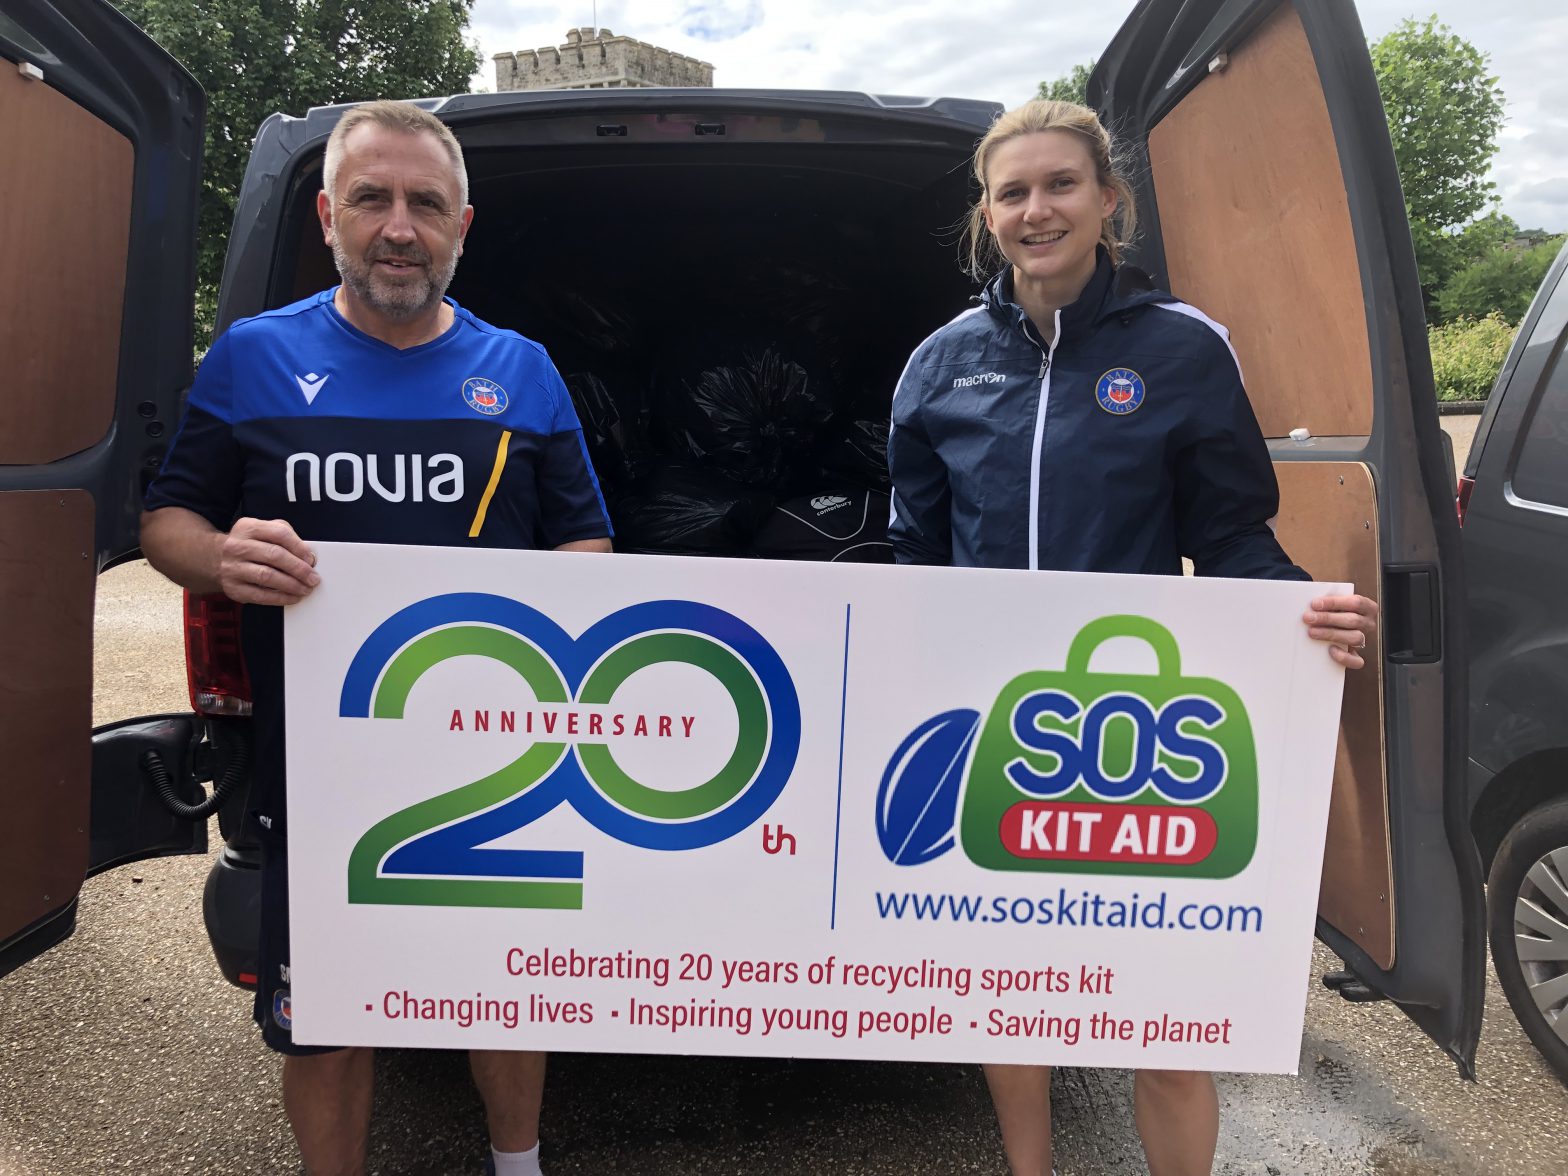 Bath rugby kit donation and SOS Kit Aid